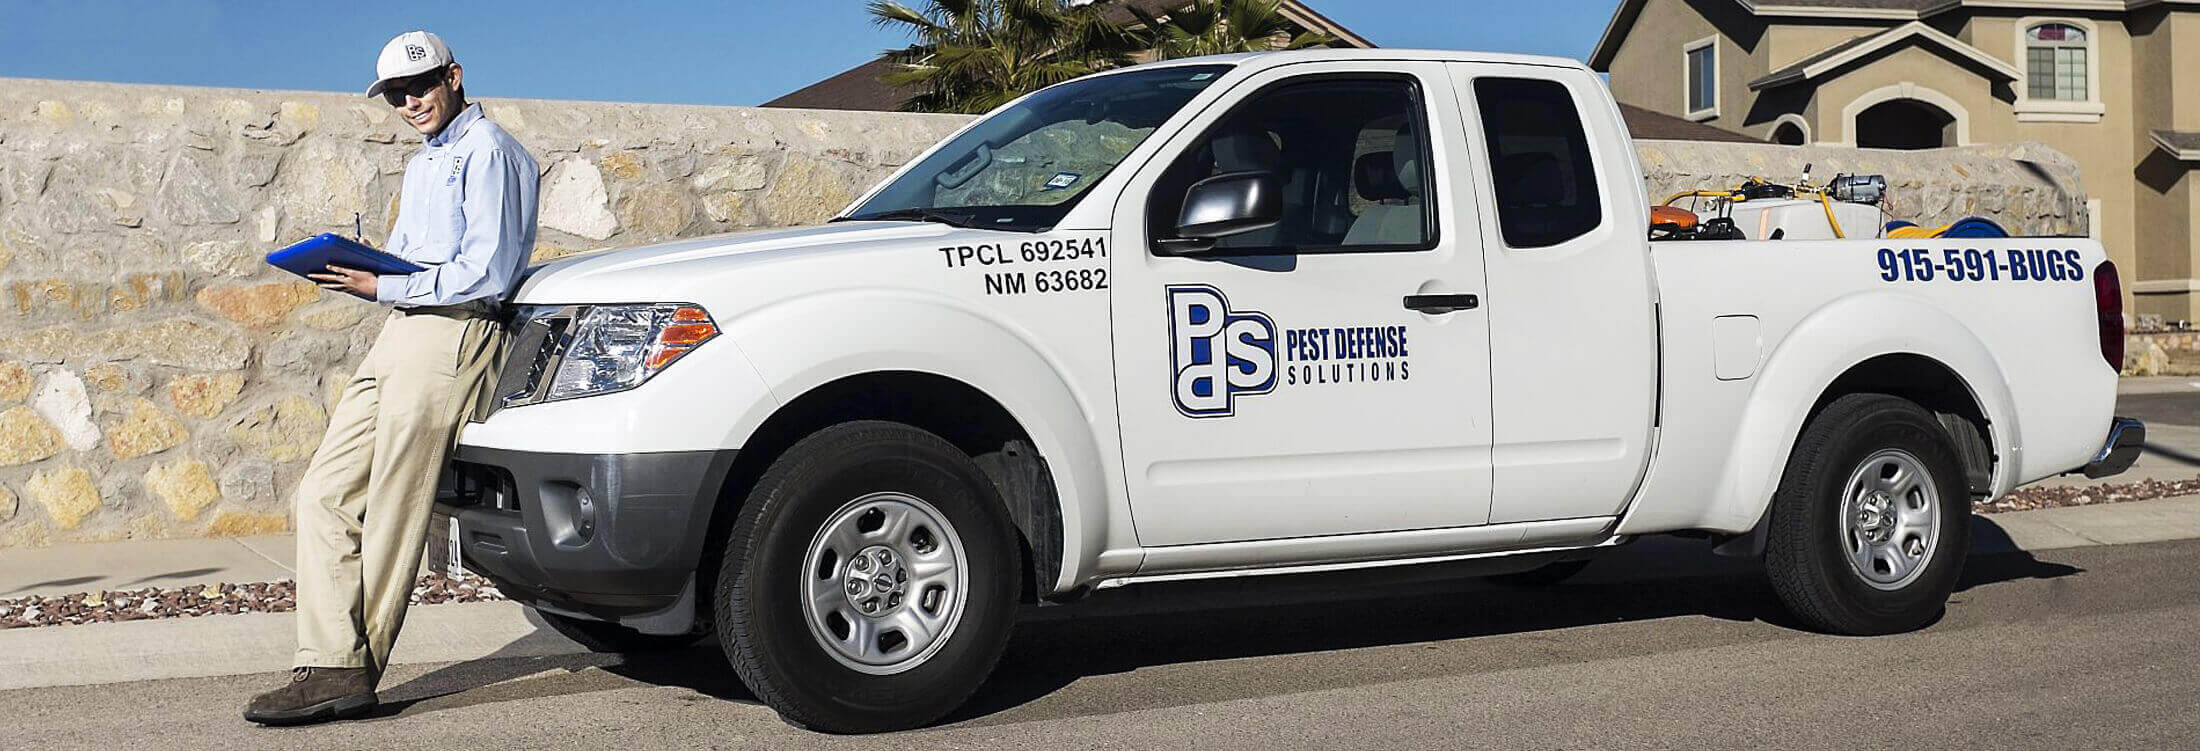 pest control solutions in El Paso TX provided by Pest Defense Solutions